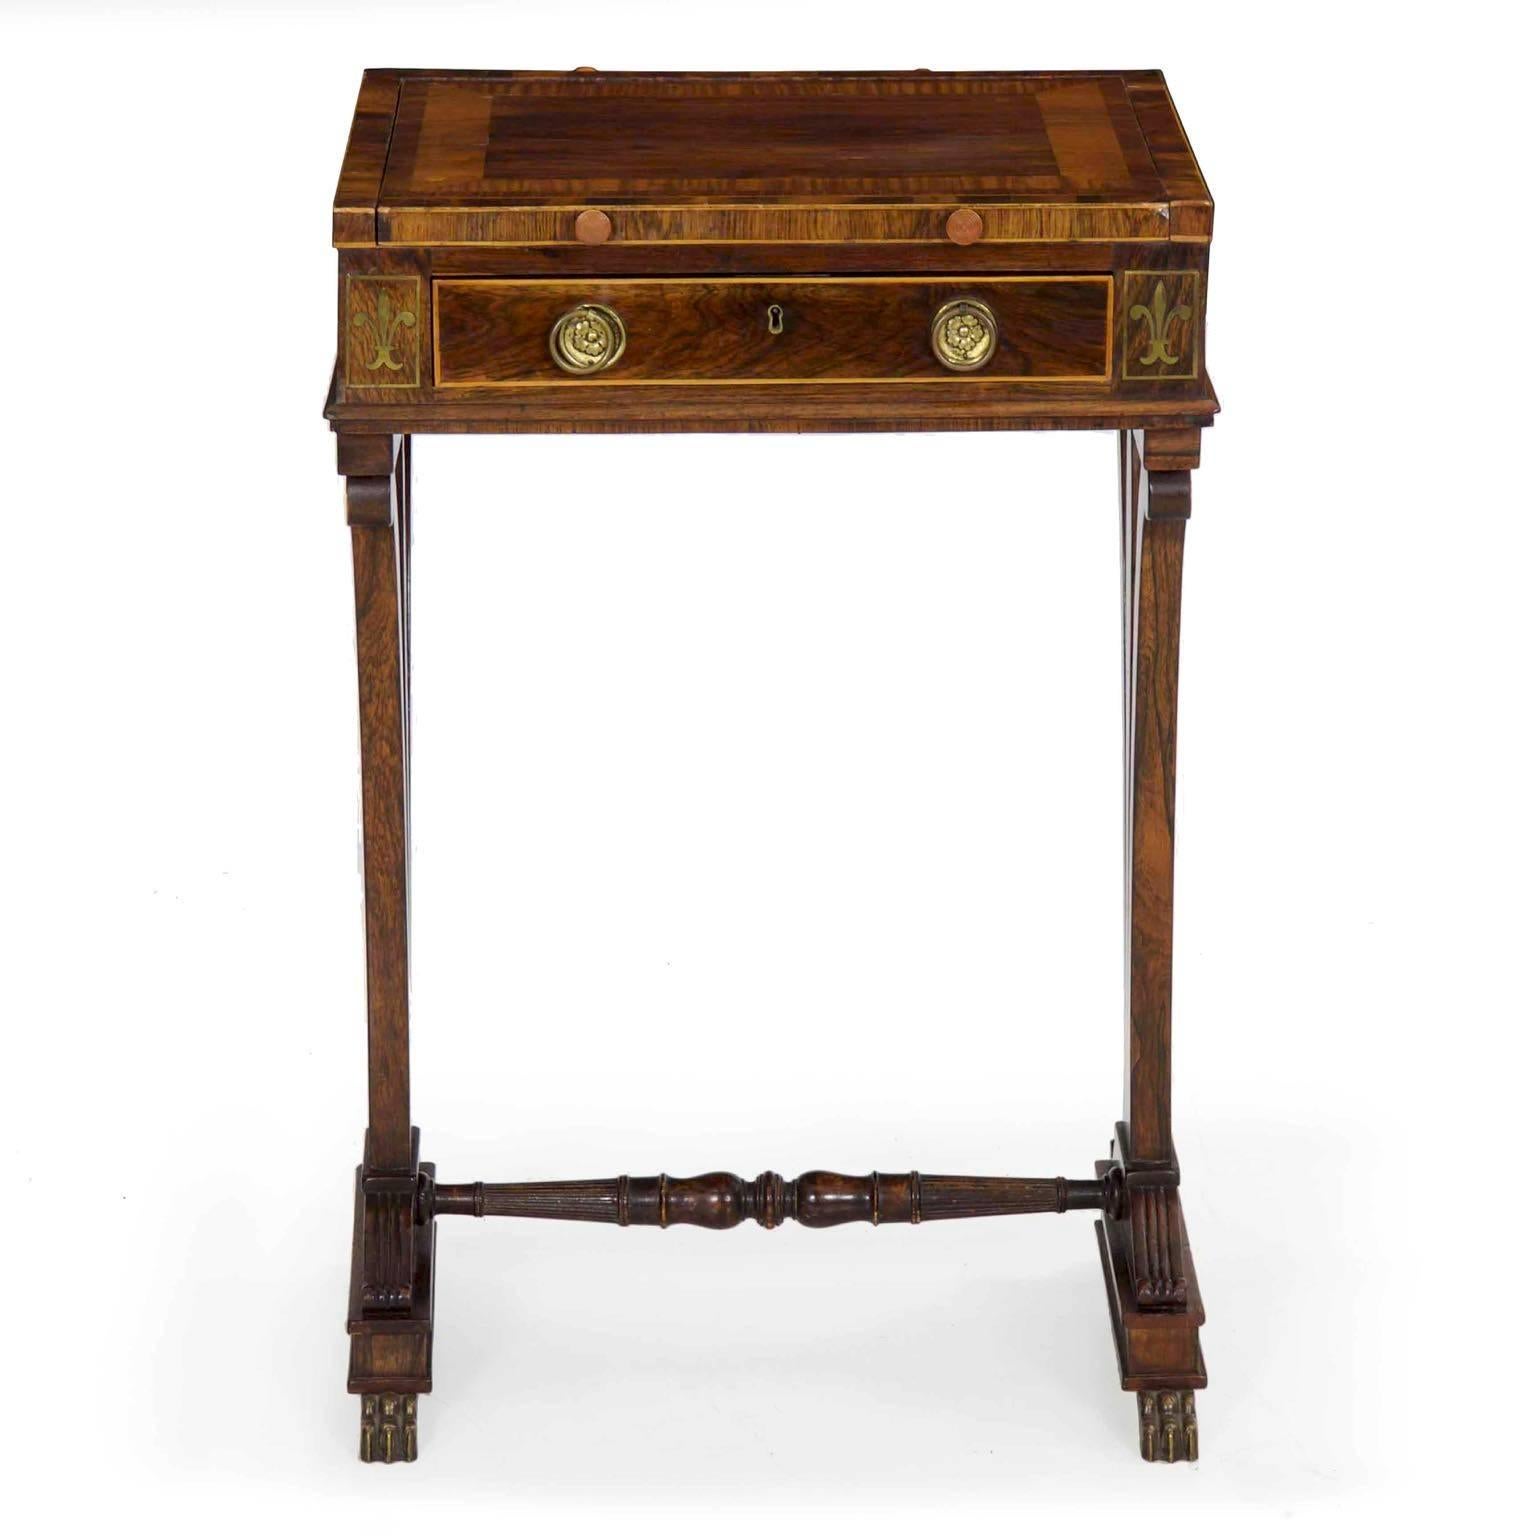 English 19th Century Regency Rosewood Writing Table Accent Console, circa 1815-1825